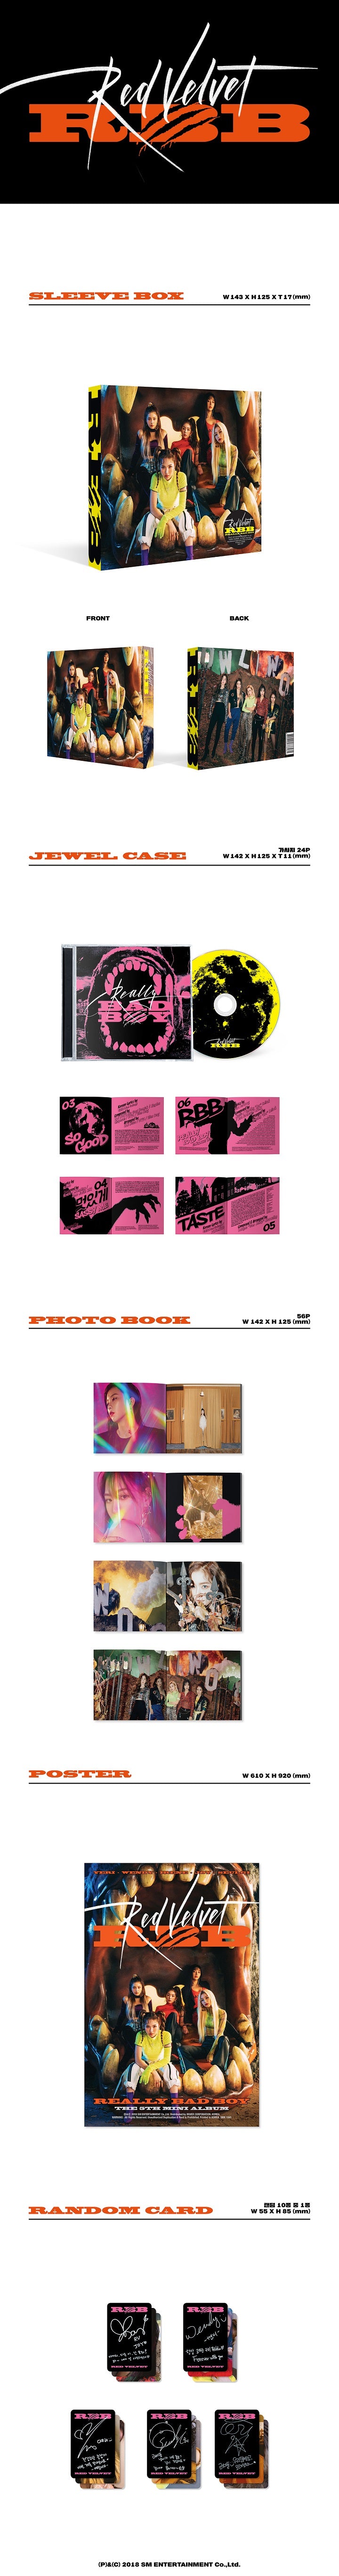 1 CD
1 Photo Book (56 pages)
1 Photo Card (random out of 10 types)